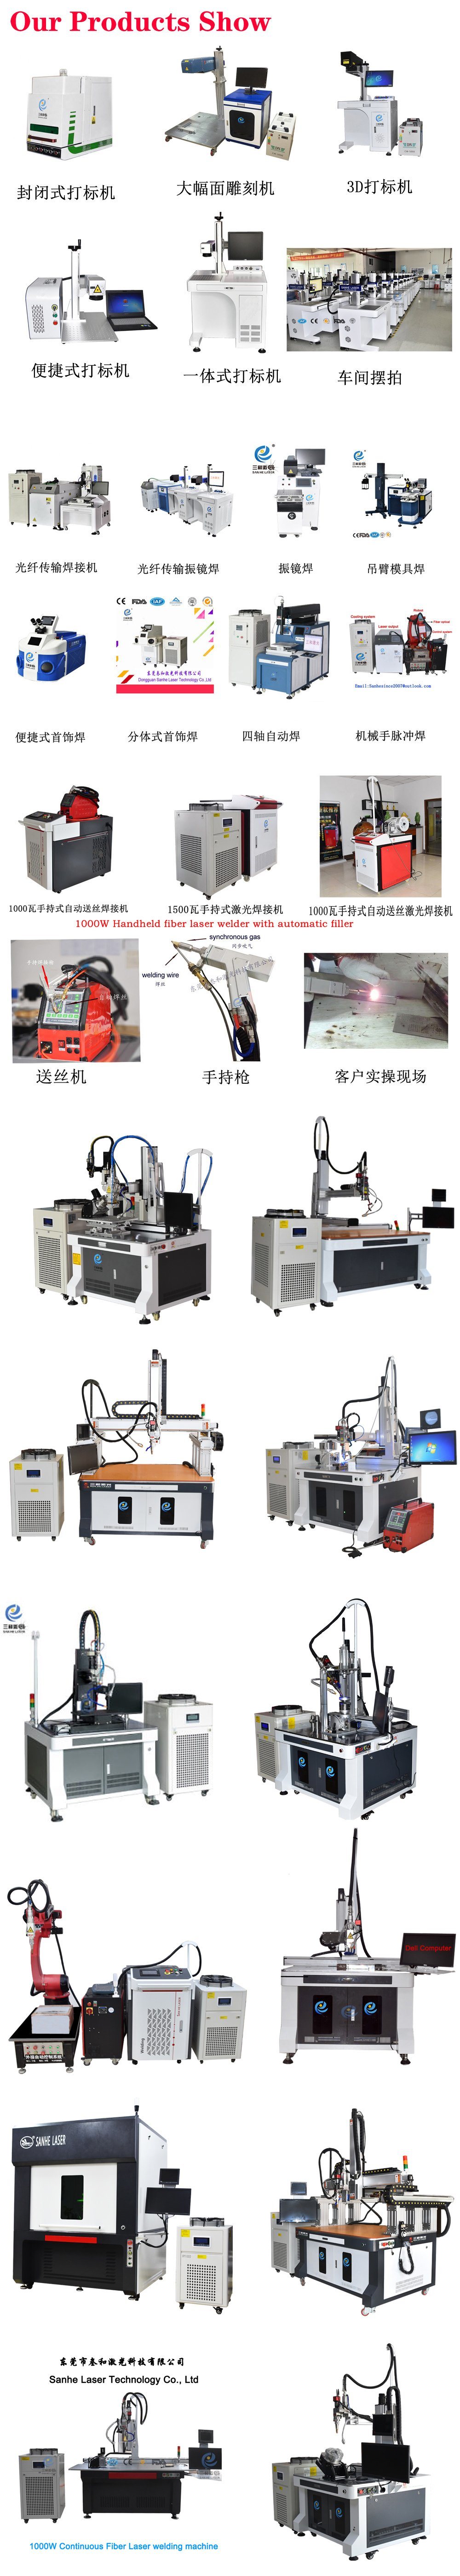 20W 30W Portable Mopa Fiber Laser Marking Machine for Color Marking on Stainless Steel Aluminum